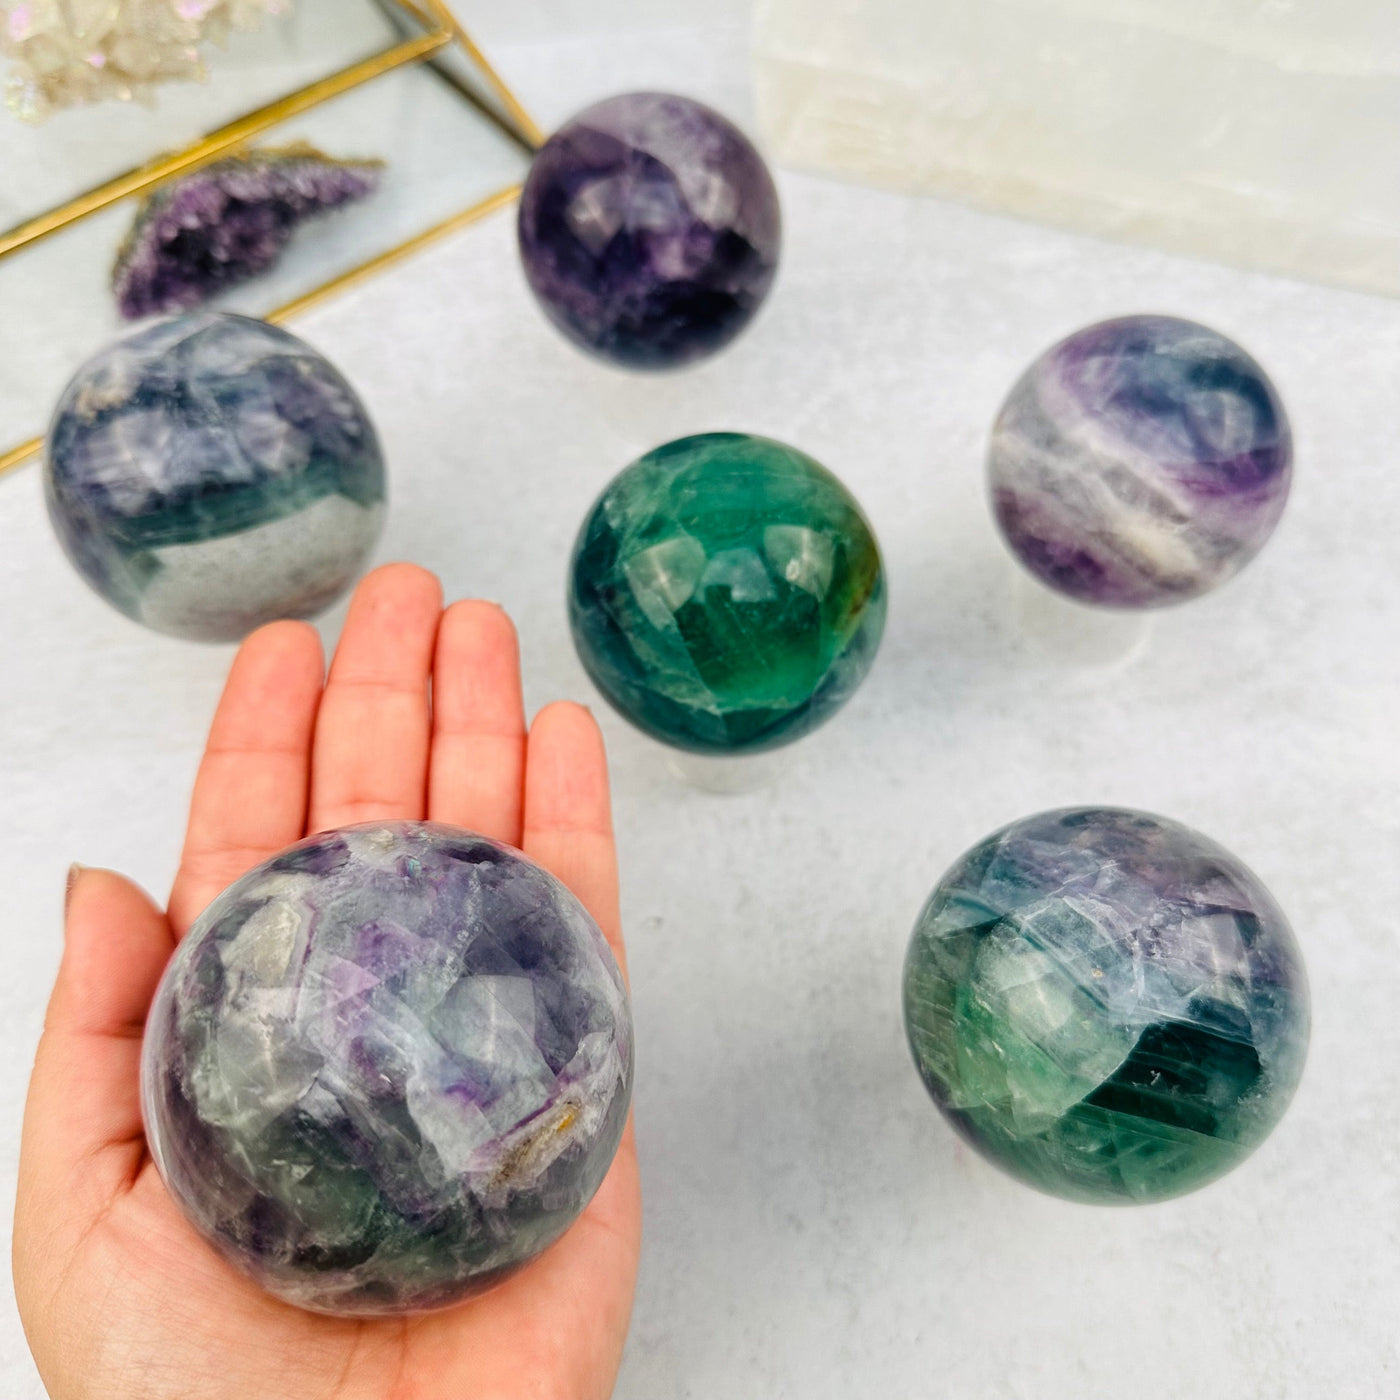 Rainbow Fluorite Sphere in hand for size reference 